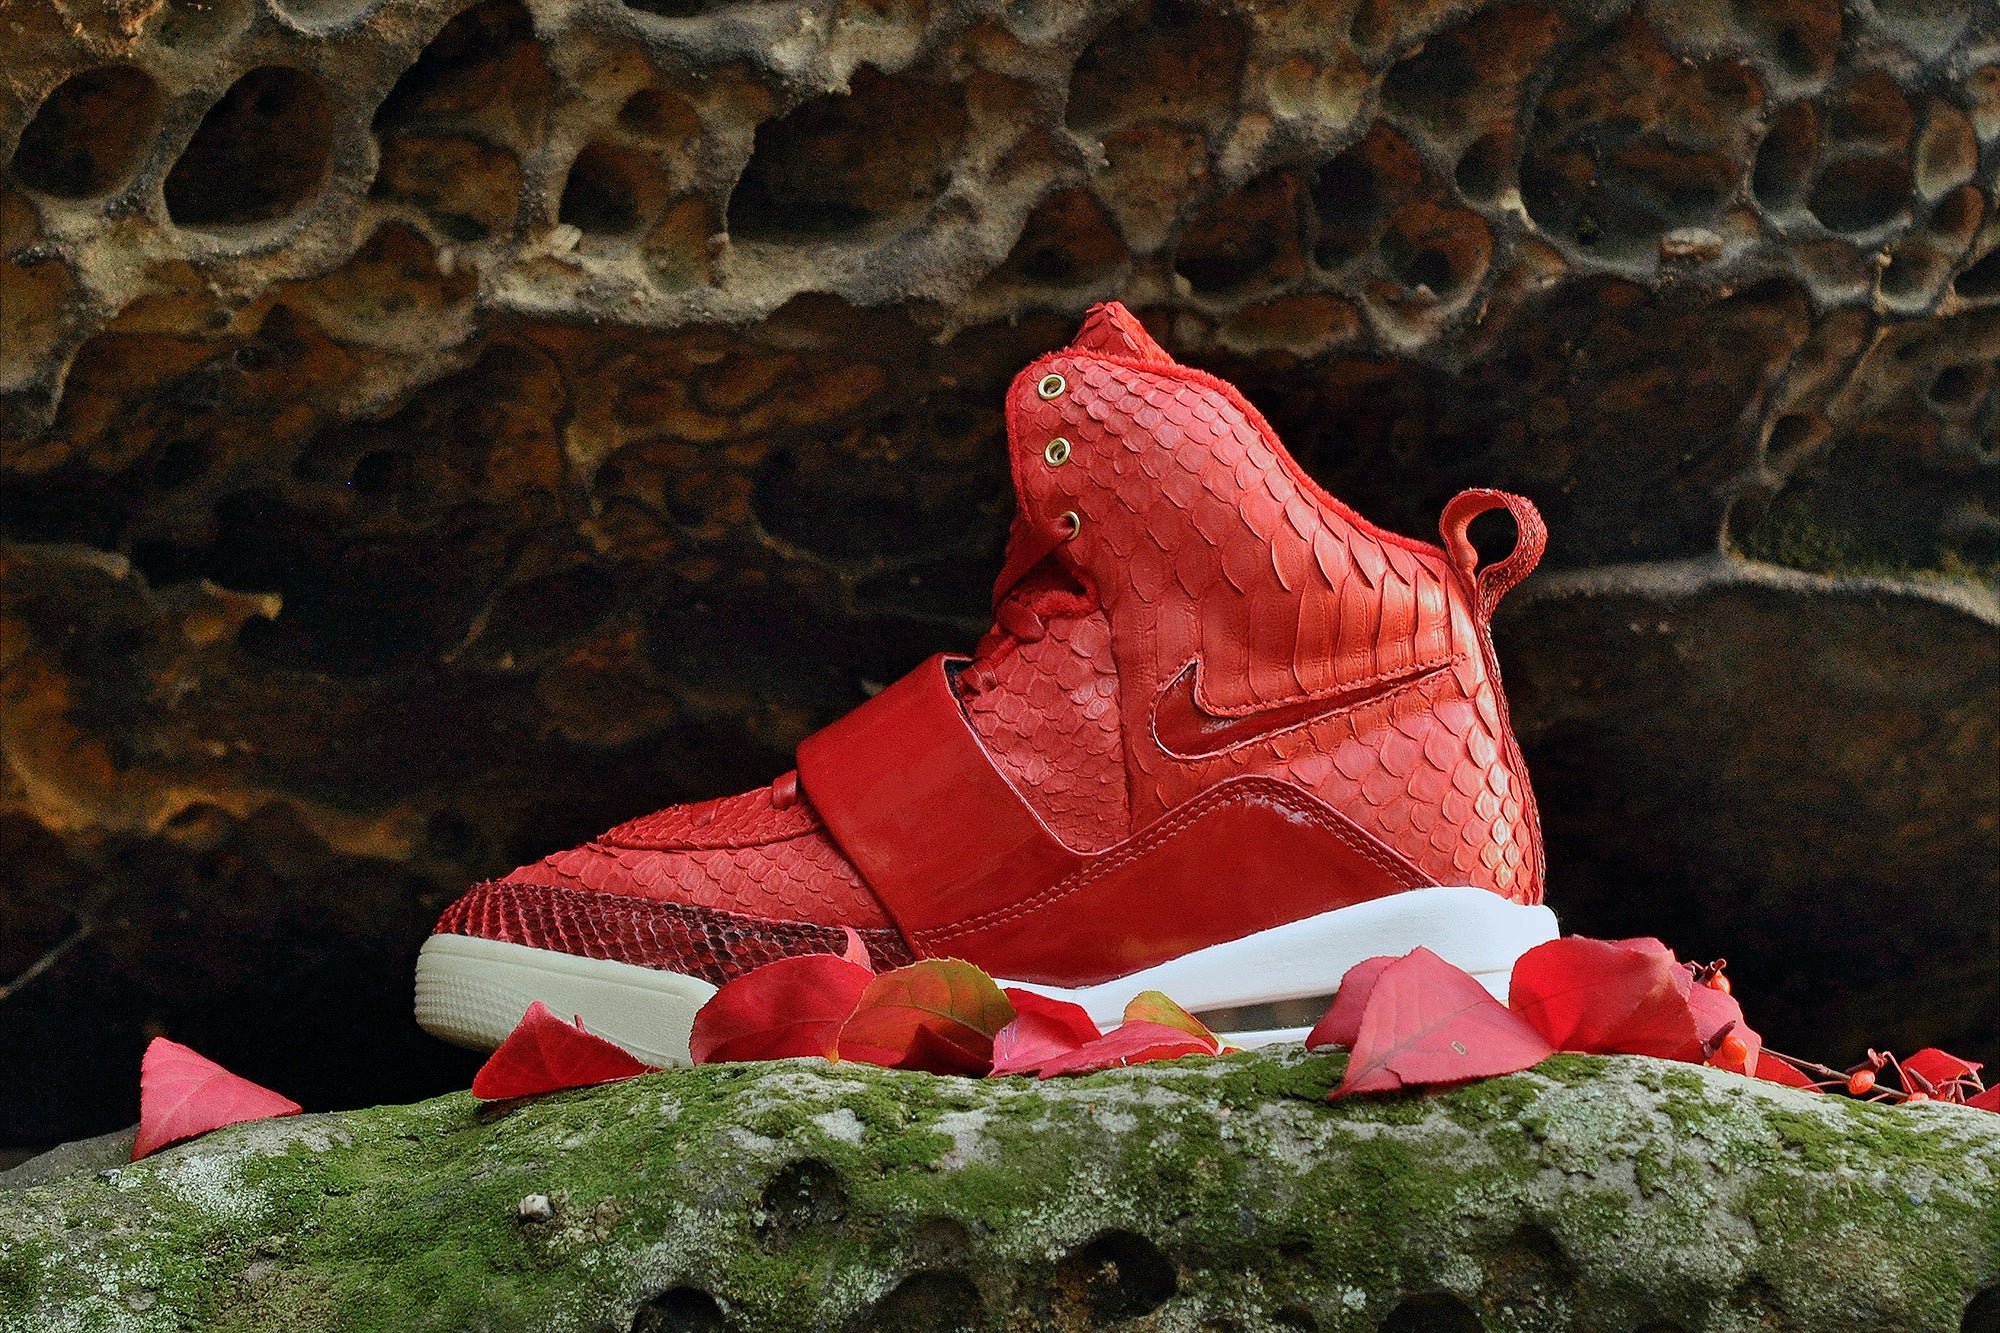 yeezy 1 red